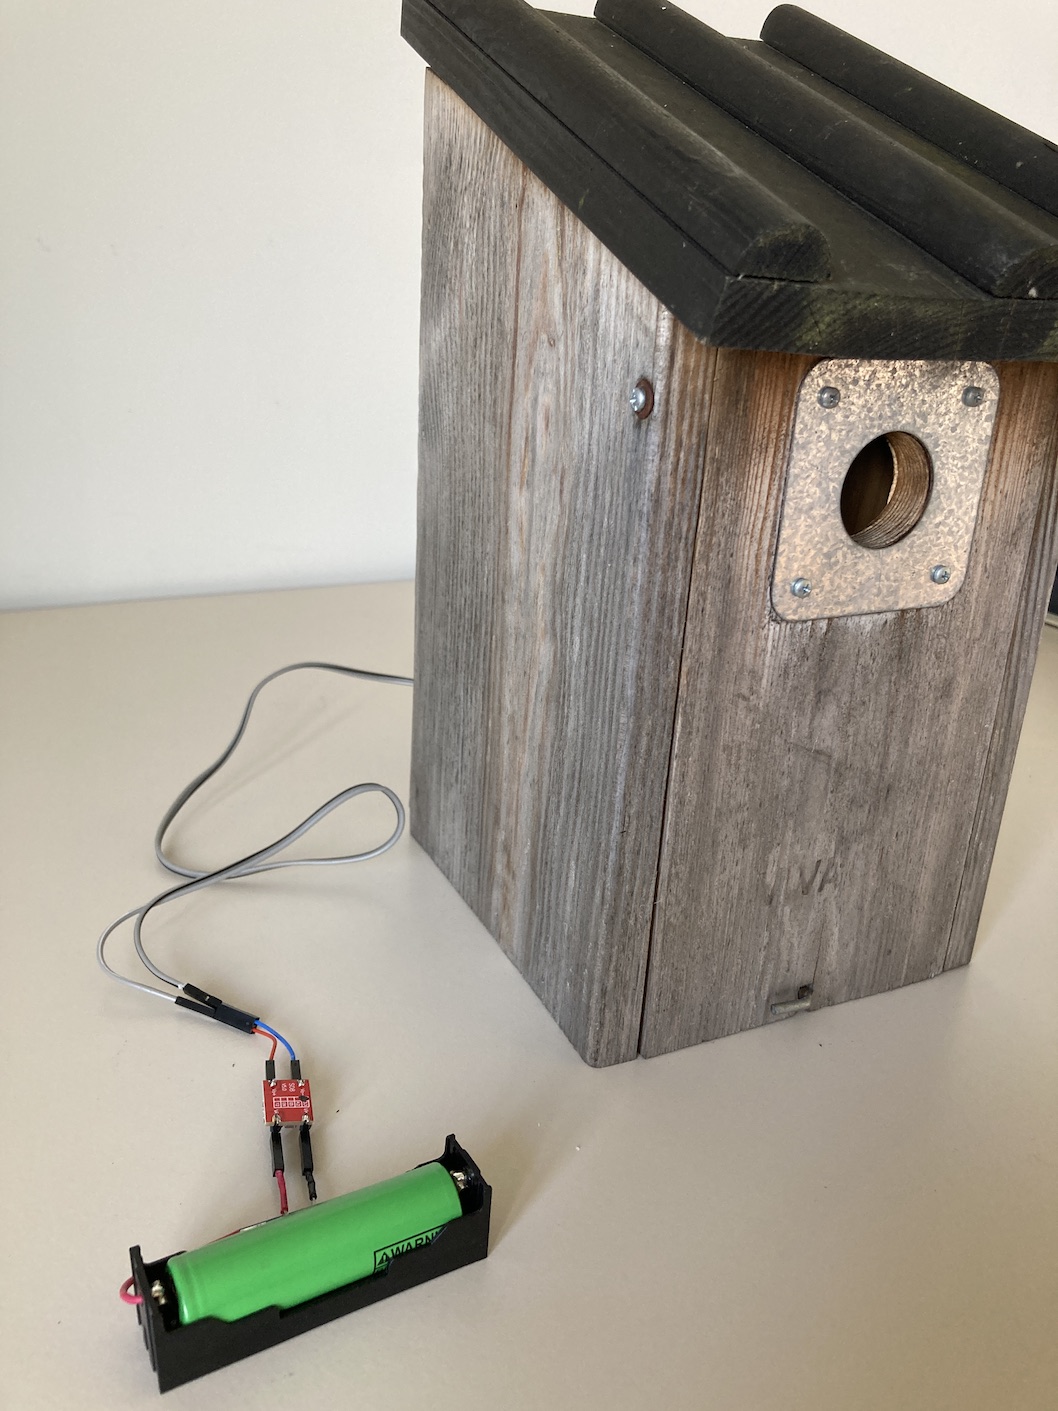 birdhouse and battery